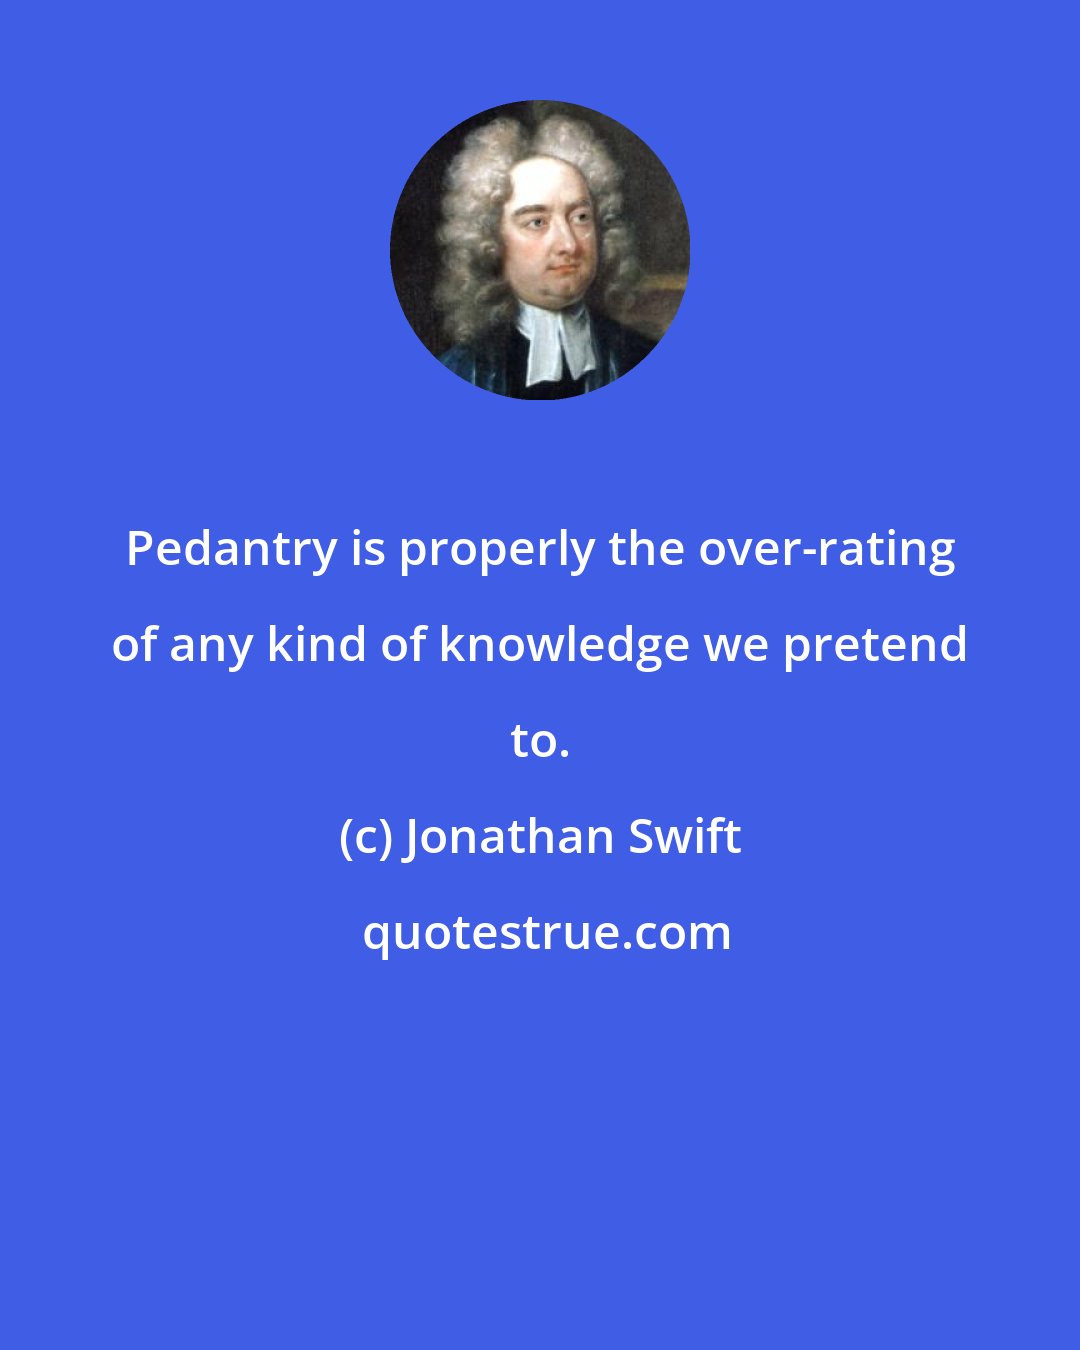 Jonathan Swift: Pedantry is properly the over-rating of any kind of knowledge we pretend to.